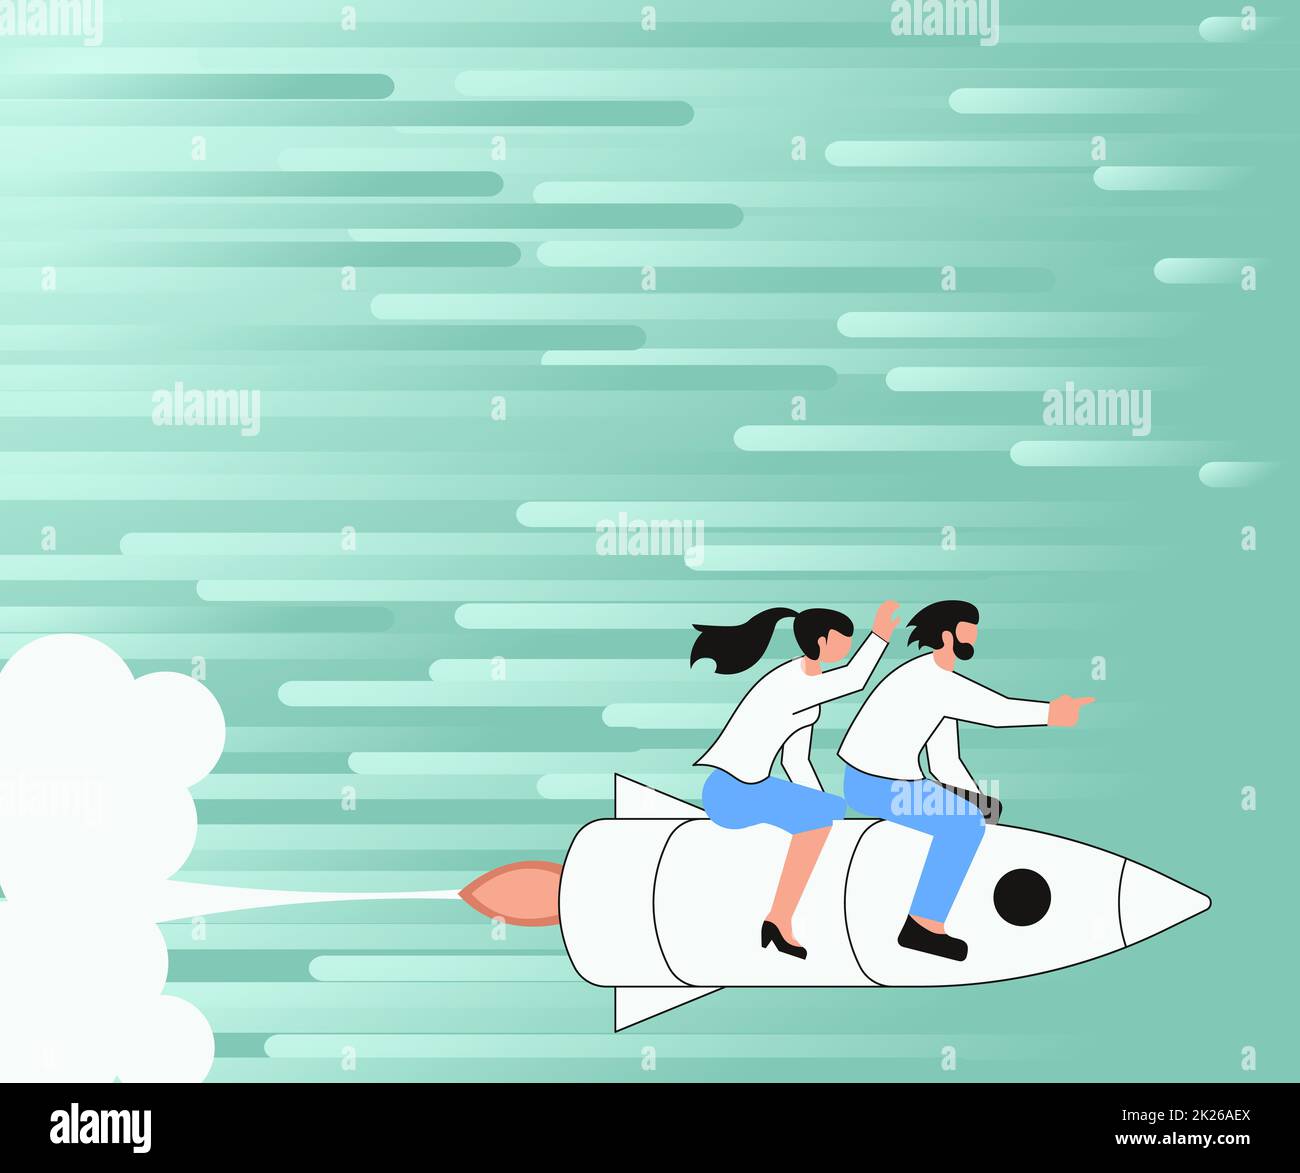 Illustration Of Happy Partners Riding On Fast Rocket Ship Exploring The World. Joyfull Couple Drawing Traveling With Rushing Space Craft Touring Space. Stock Photo